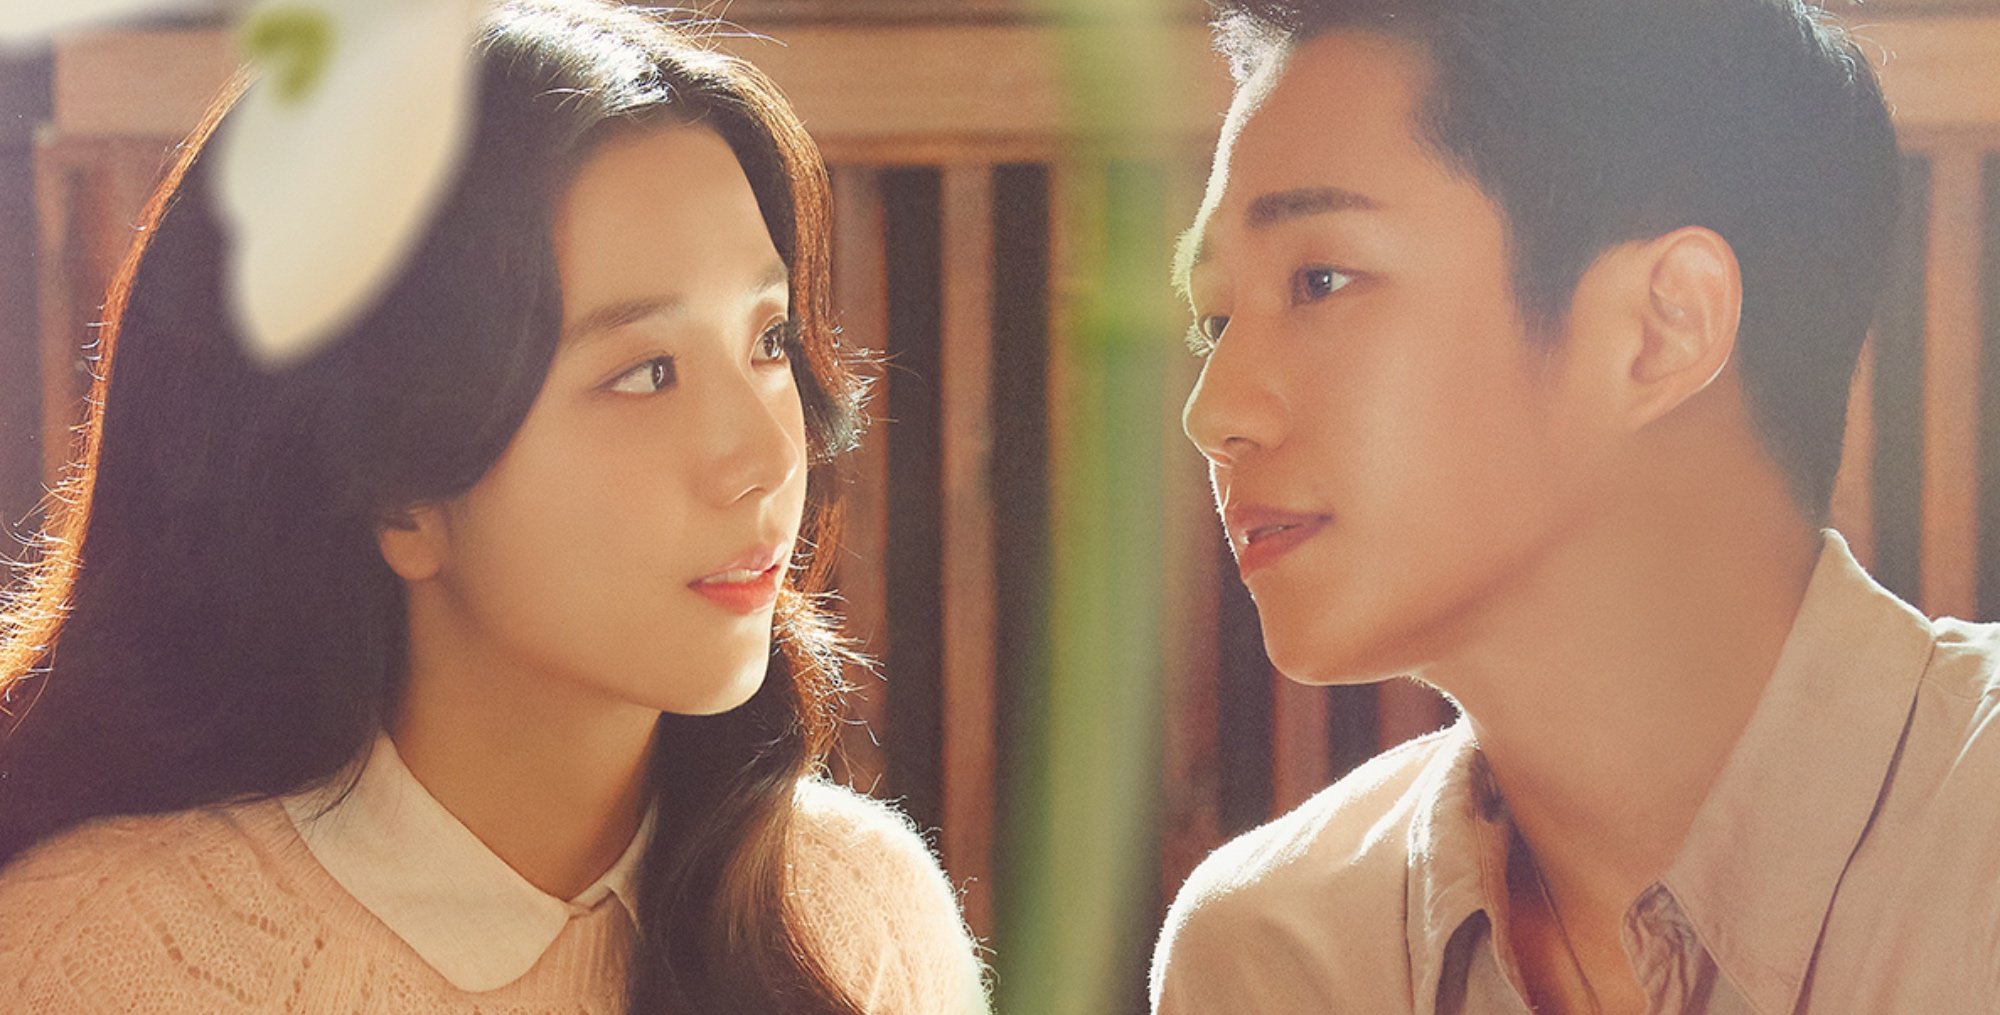 Actors Jisoo and Jung Hae-in for 'Snowdrop' K-drama wearing beige shirts looking at each other.